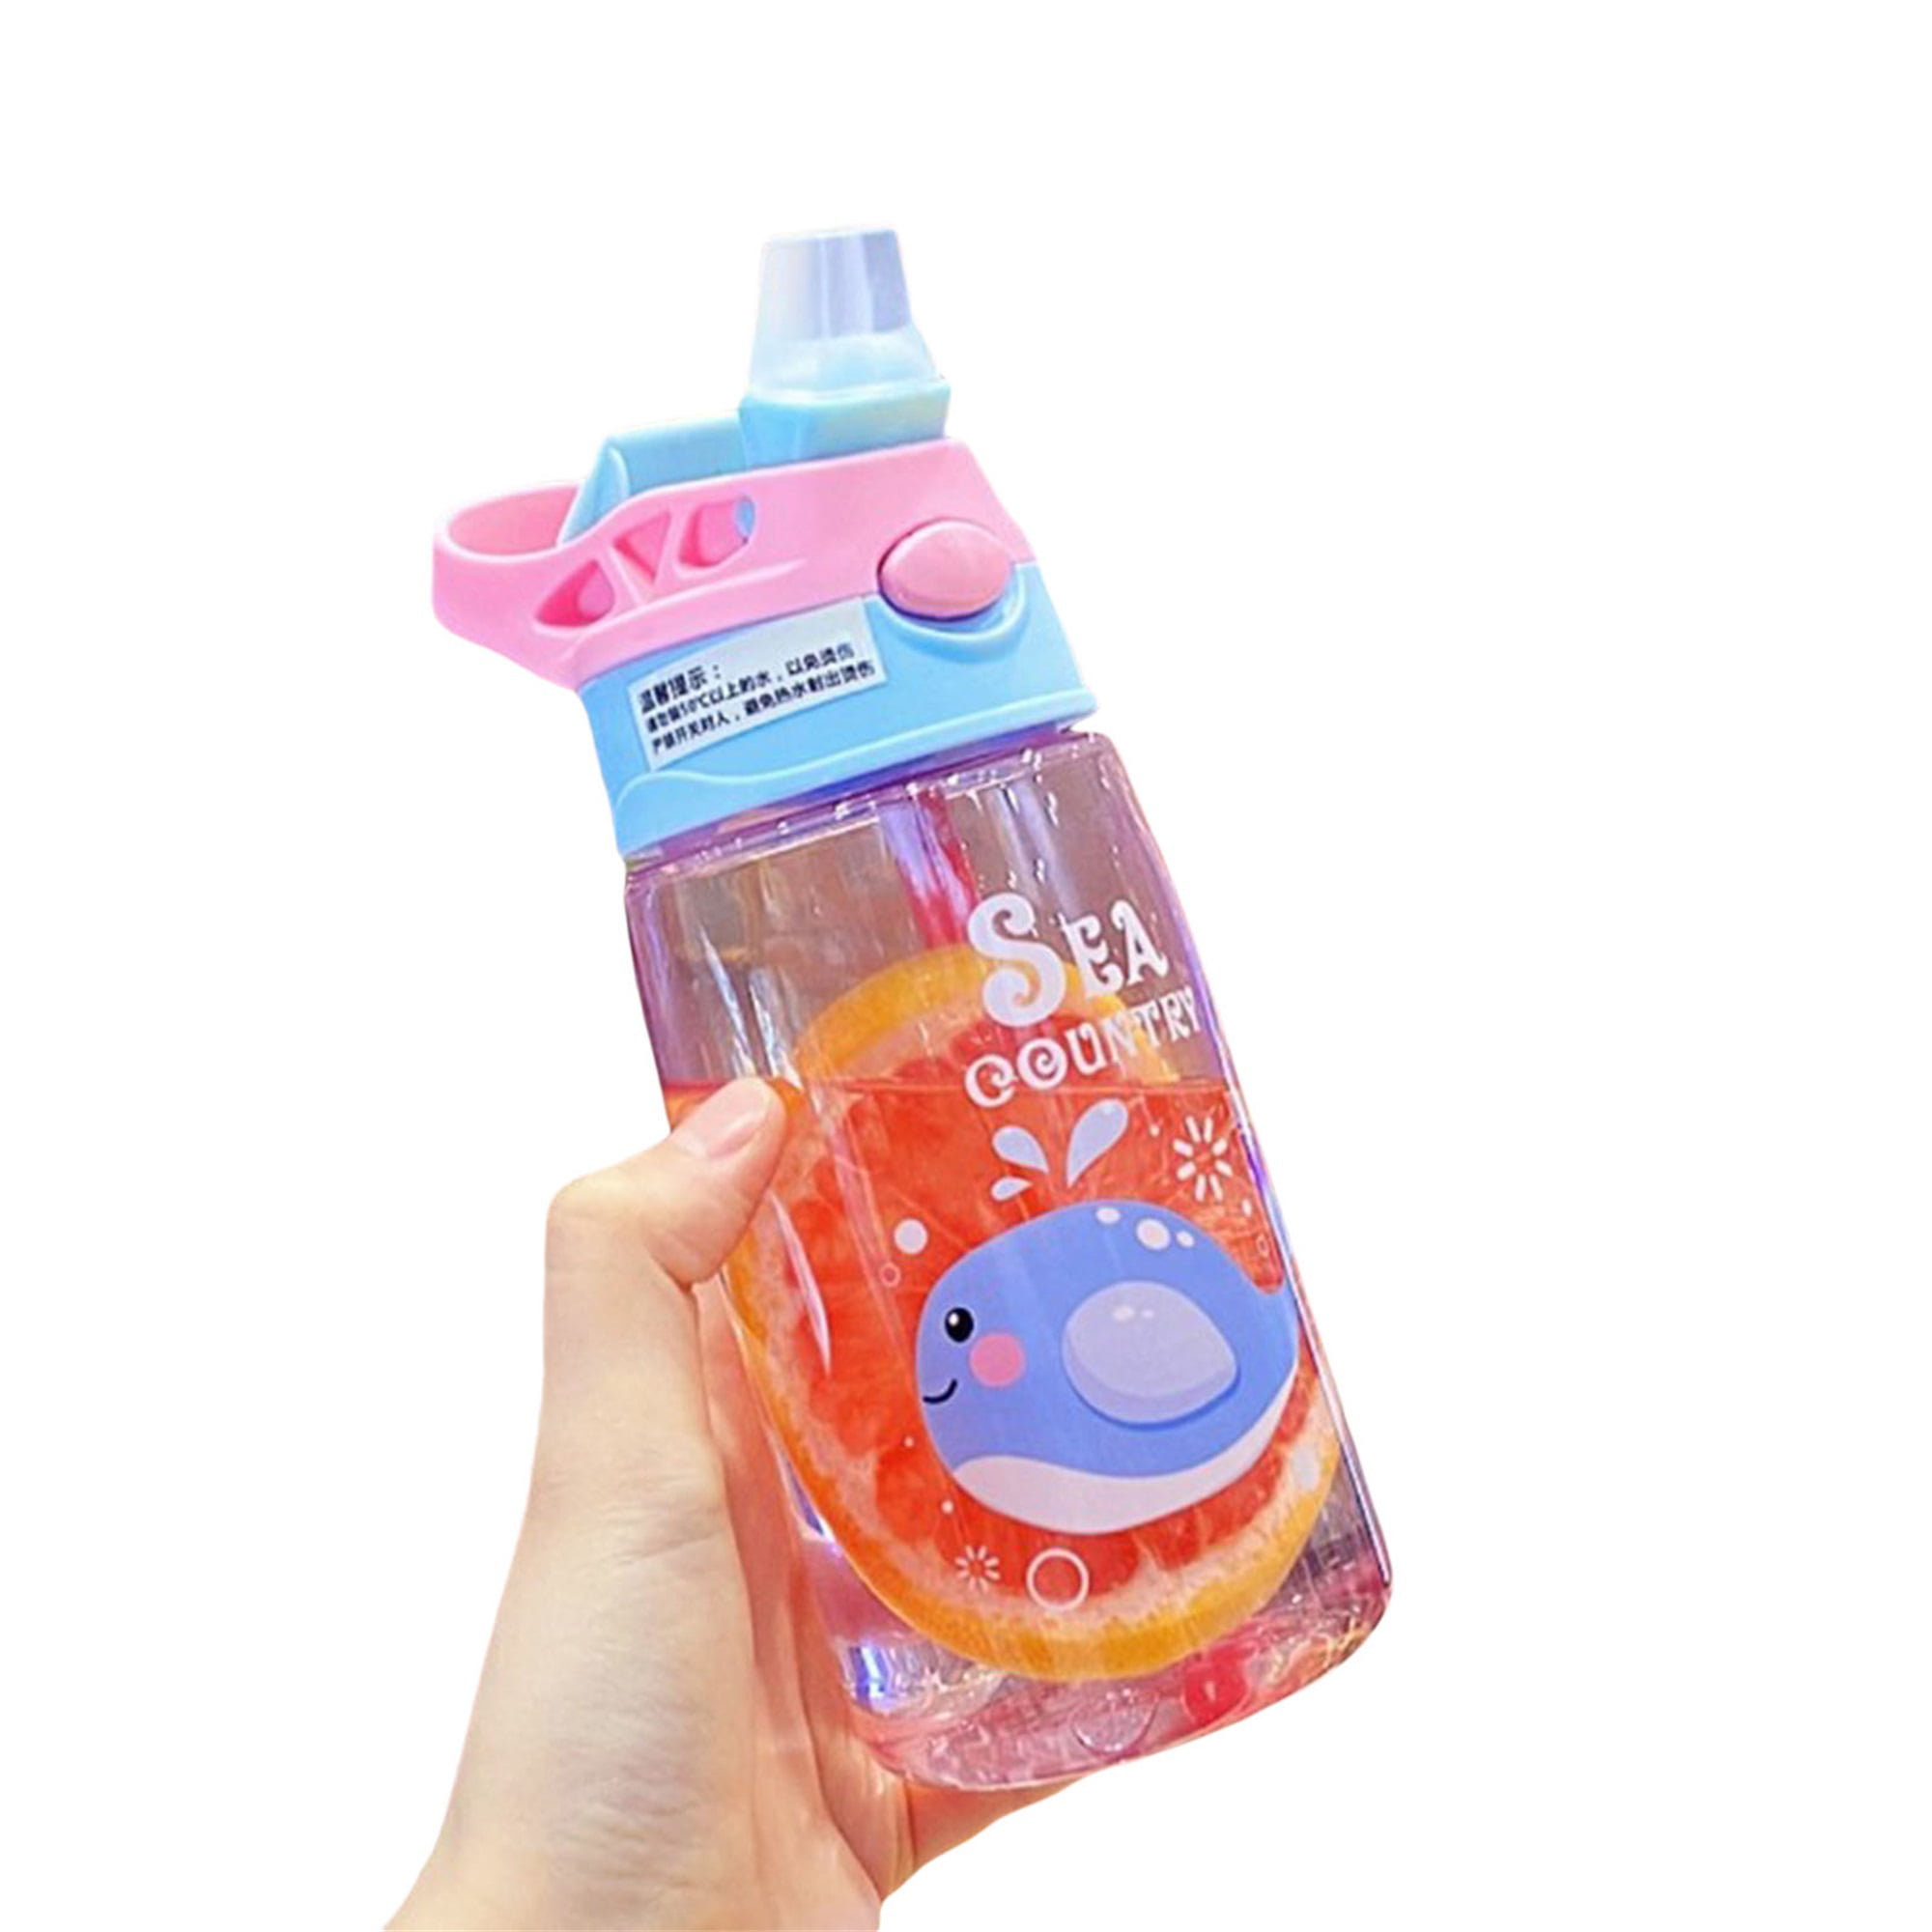 Pokémon: Stainless Water Bottle - Scarlet and Violet - 480ml